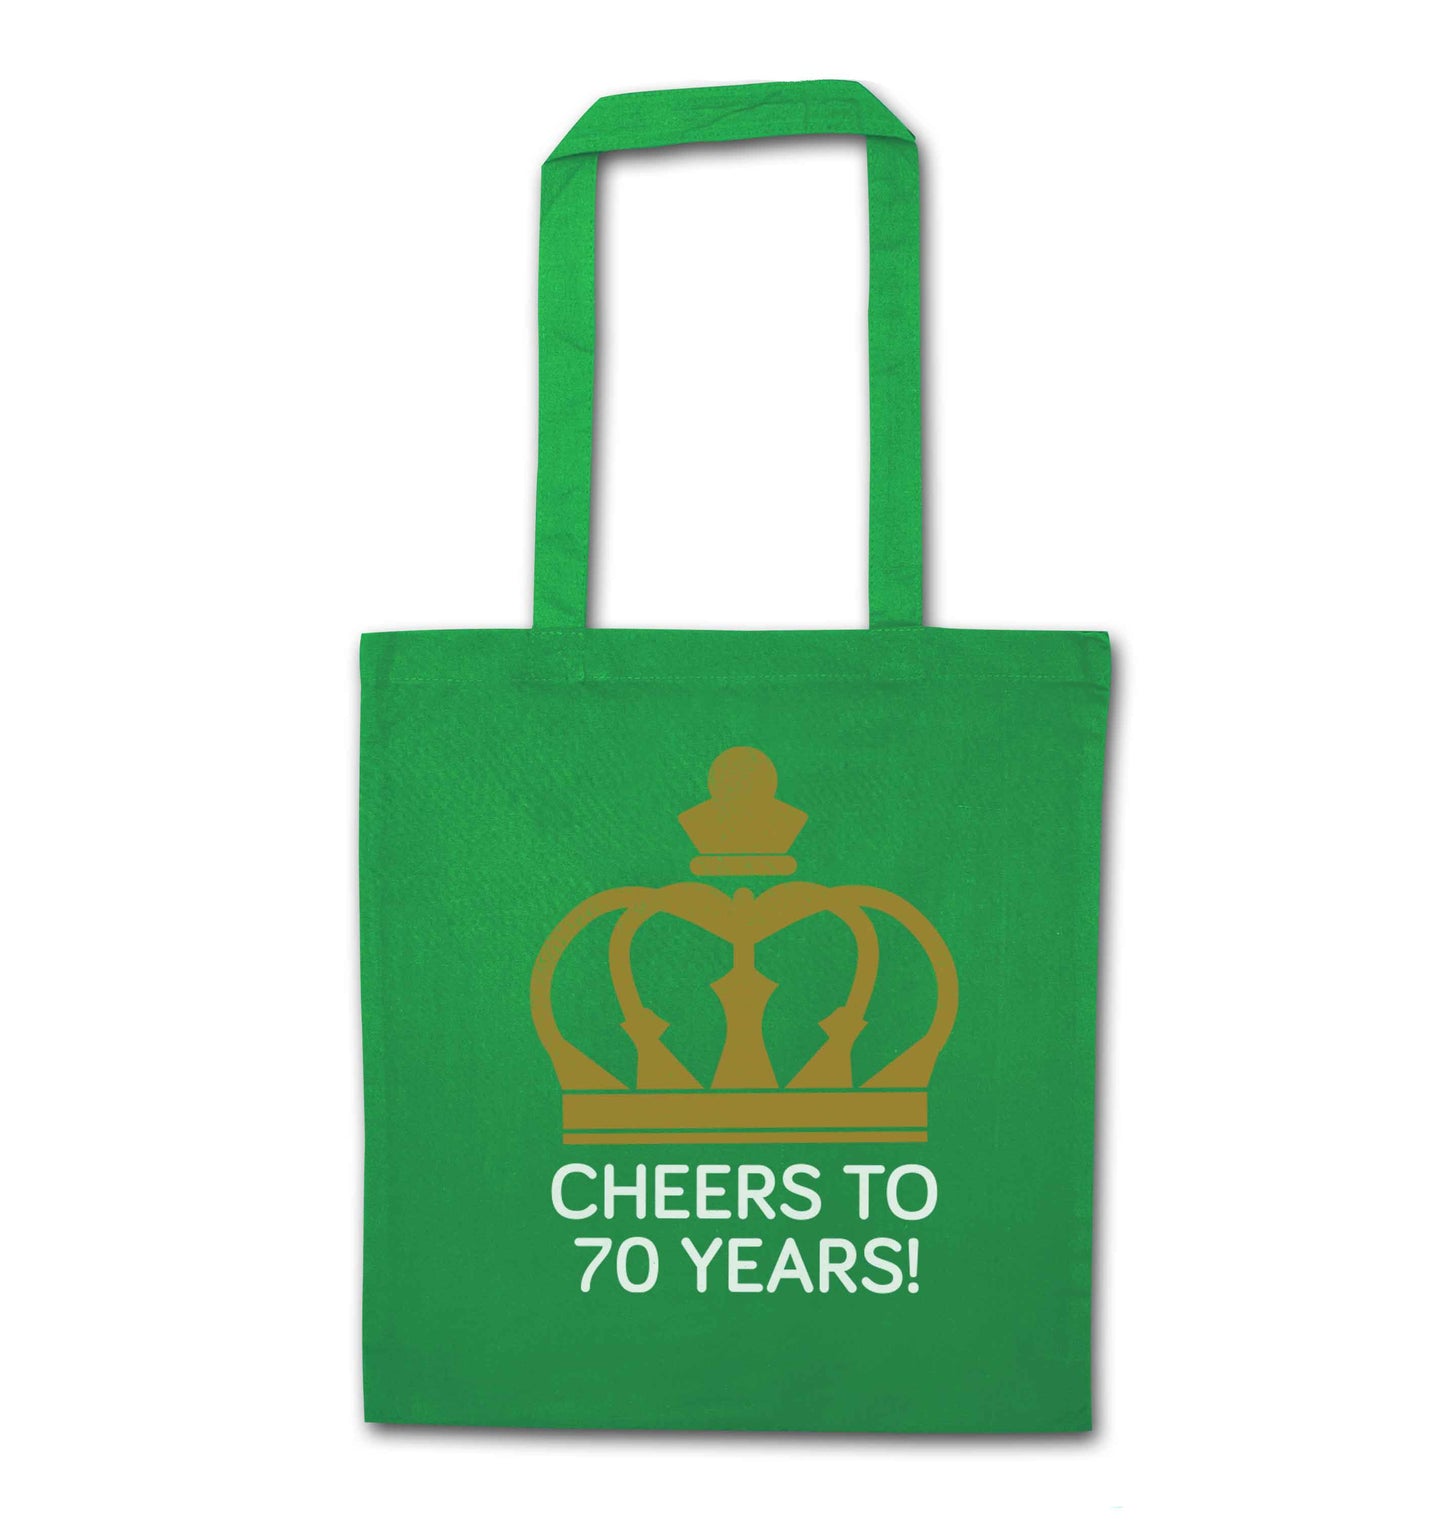 Cheers to 70 years! green tote bag